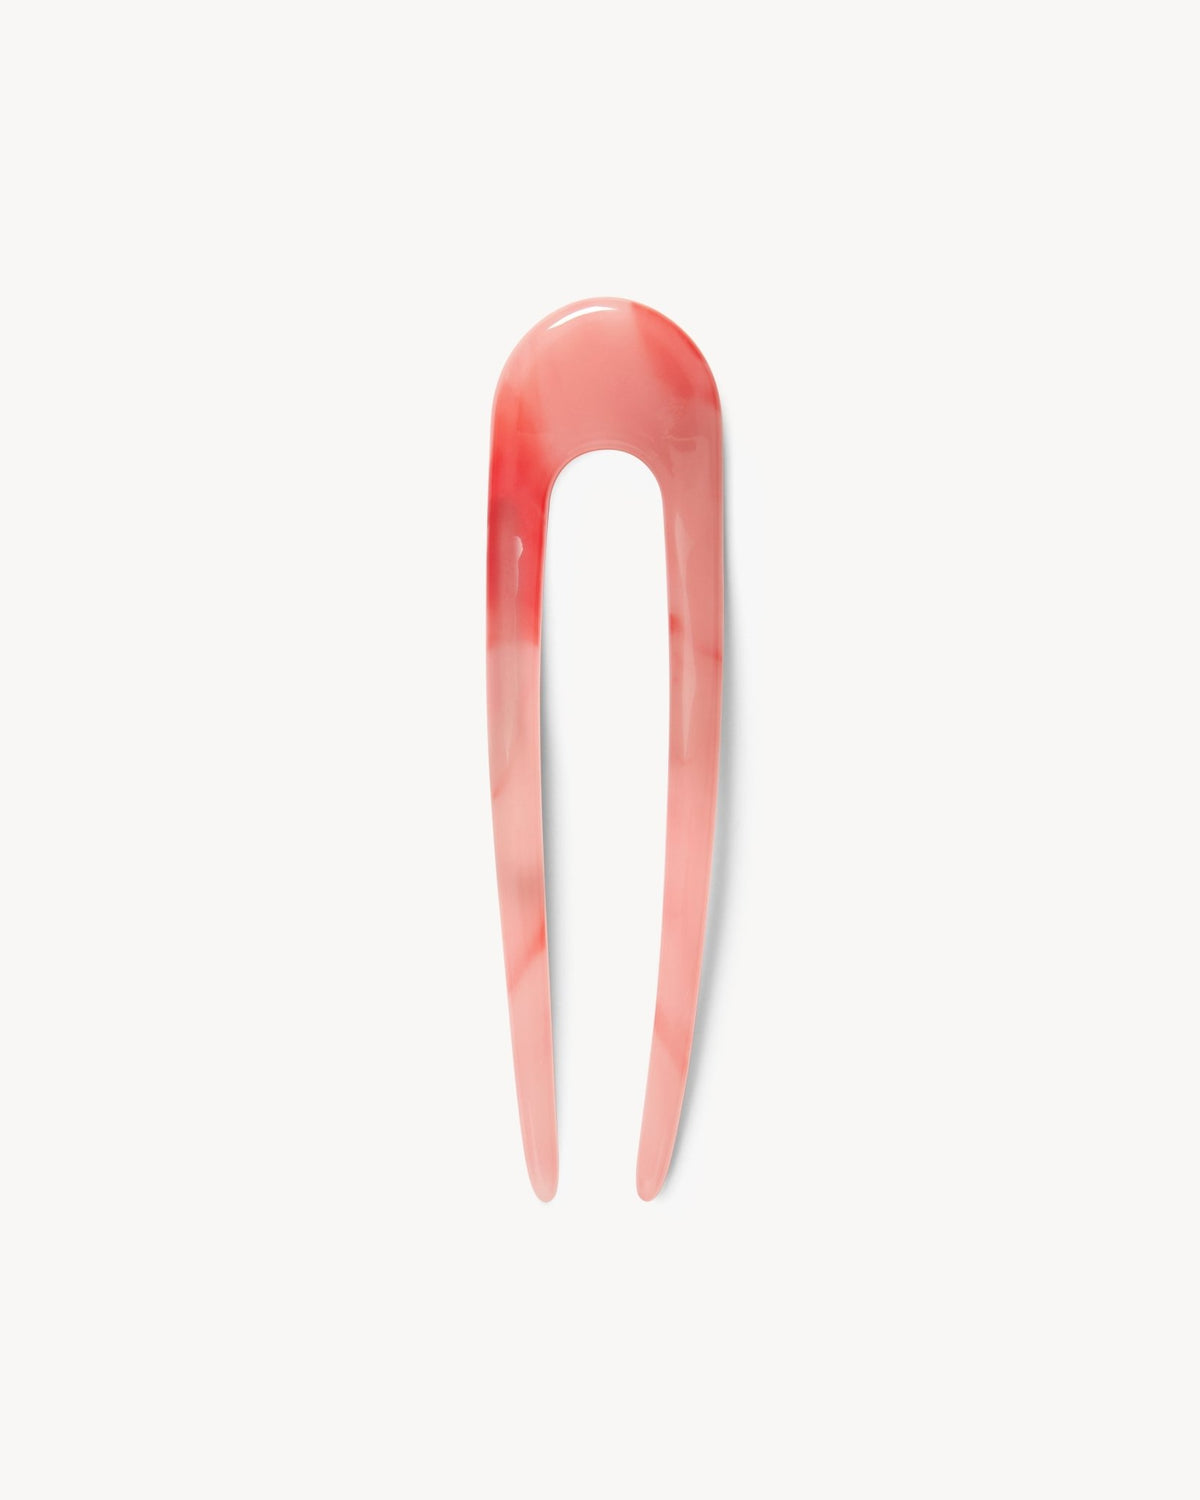 French Hair Pin in Bright Pink - MACHETE